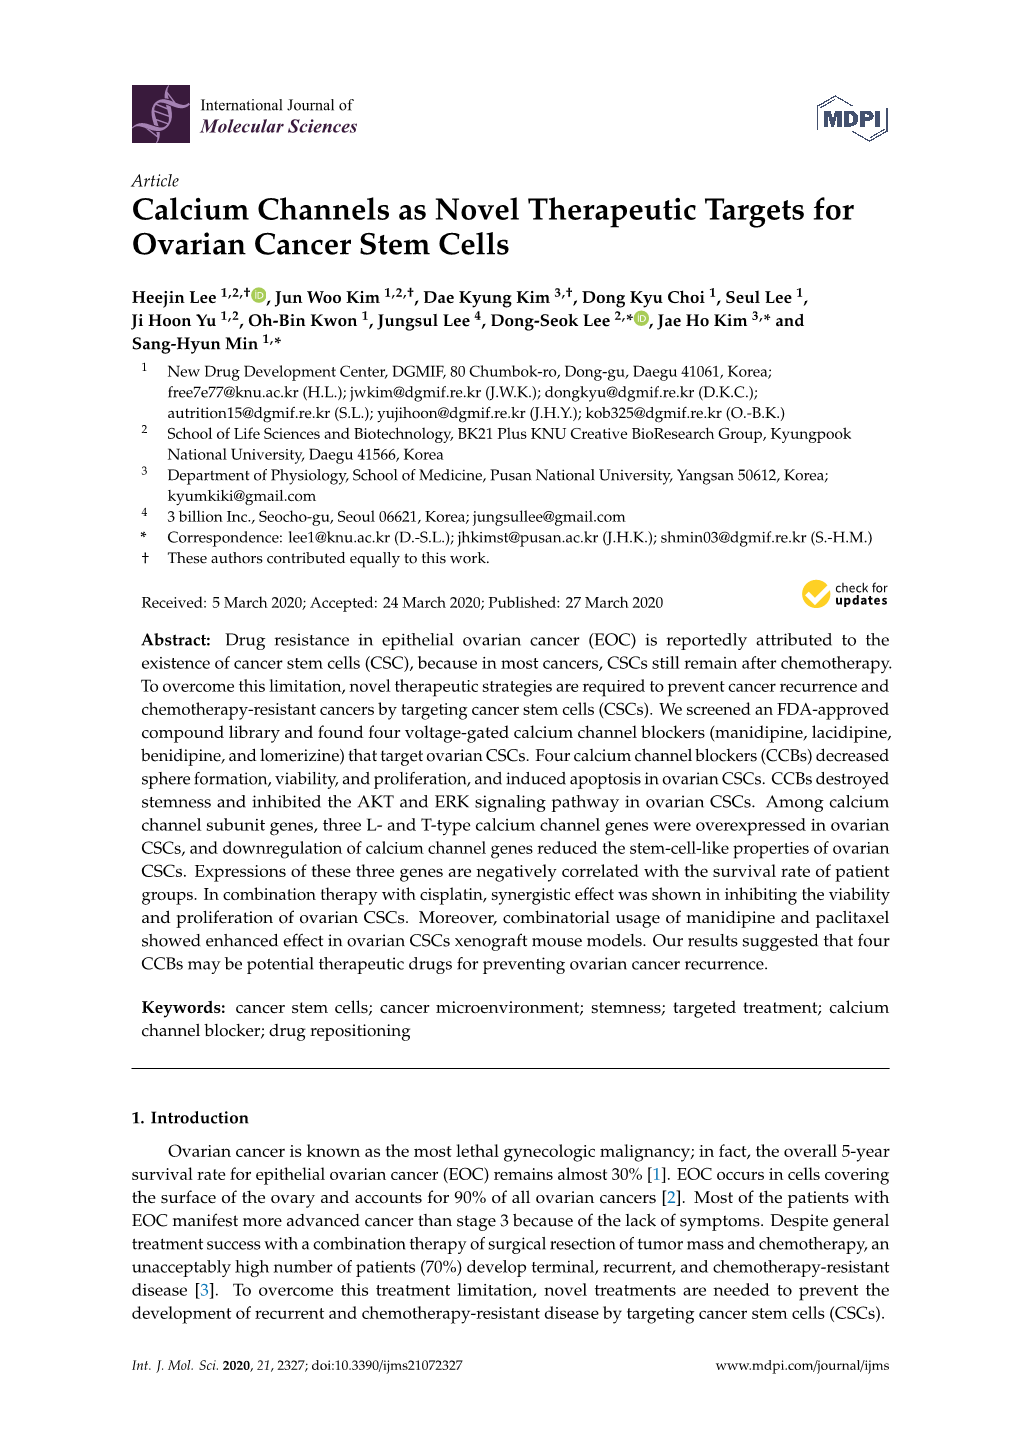 Calcium Channels As Novel Therapeutic Targets for Ovarian Cancer Stem Cells